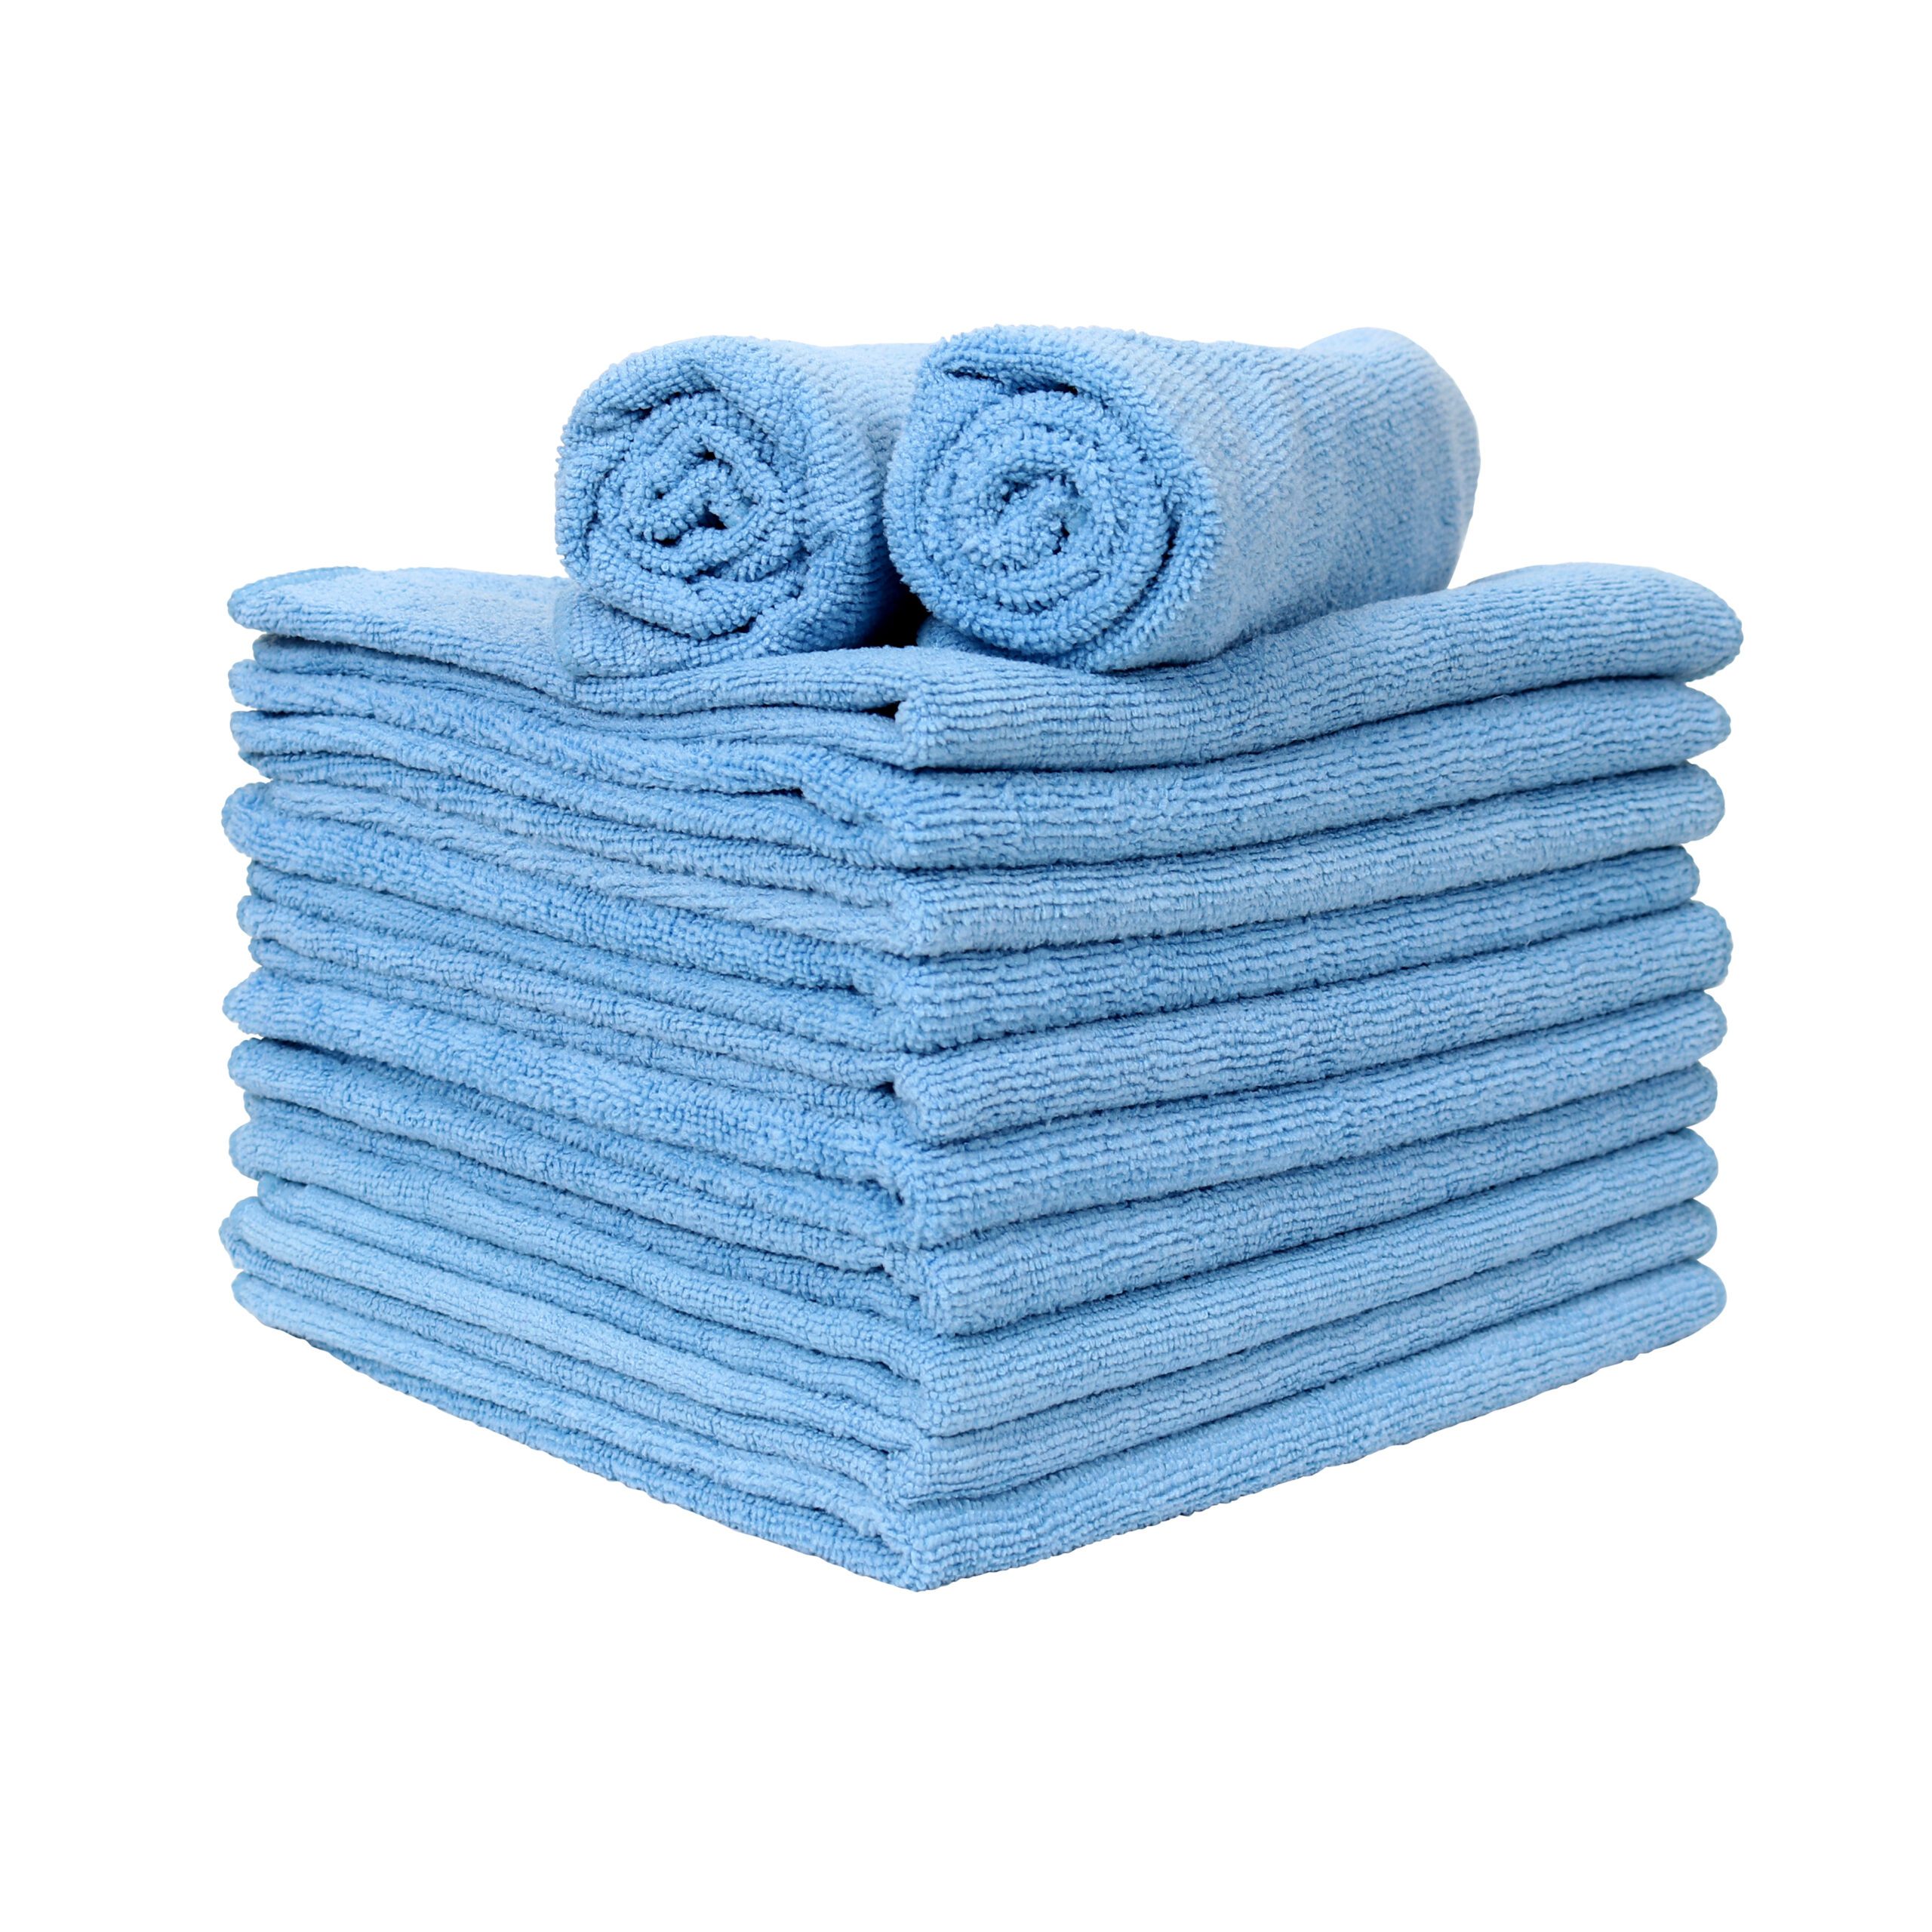 The Benefits of Microfiber for Hoteliers